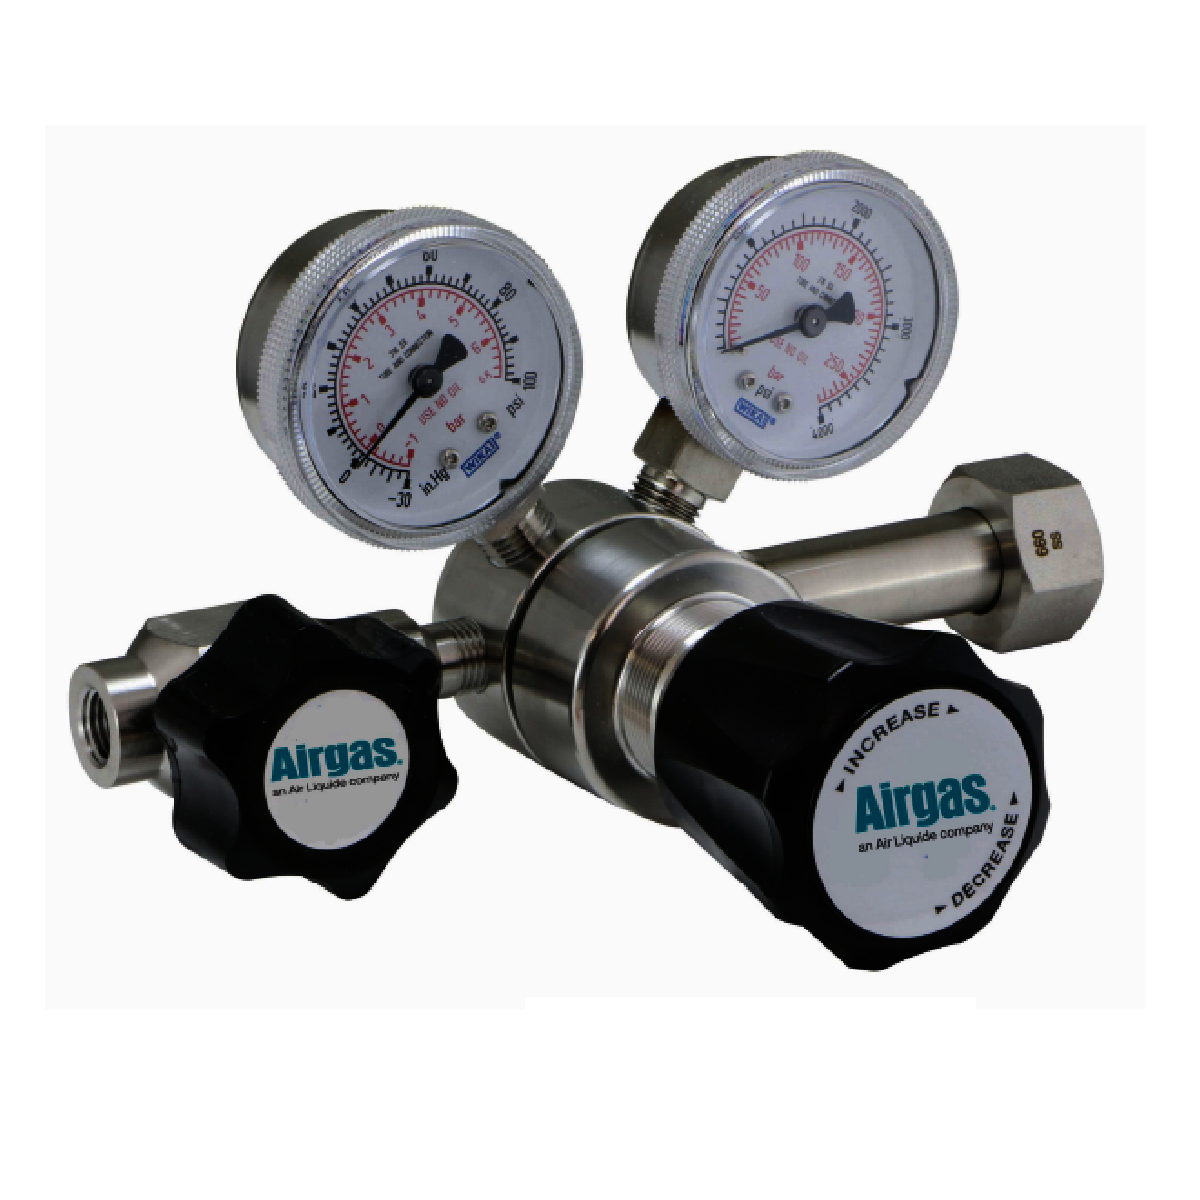 Airgas Model 217A660 Stainless Steel Ultra-High Purity Single Stage Regulator With CGA-660 Connection